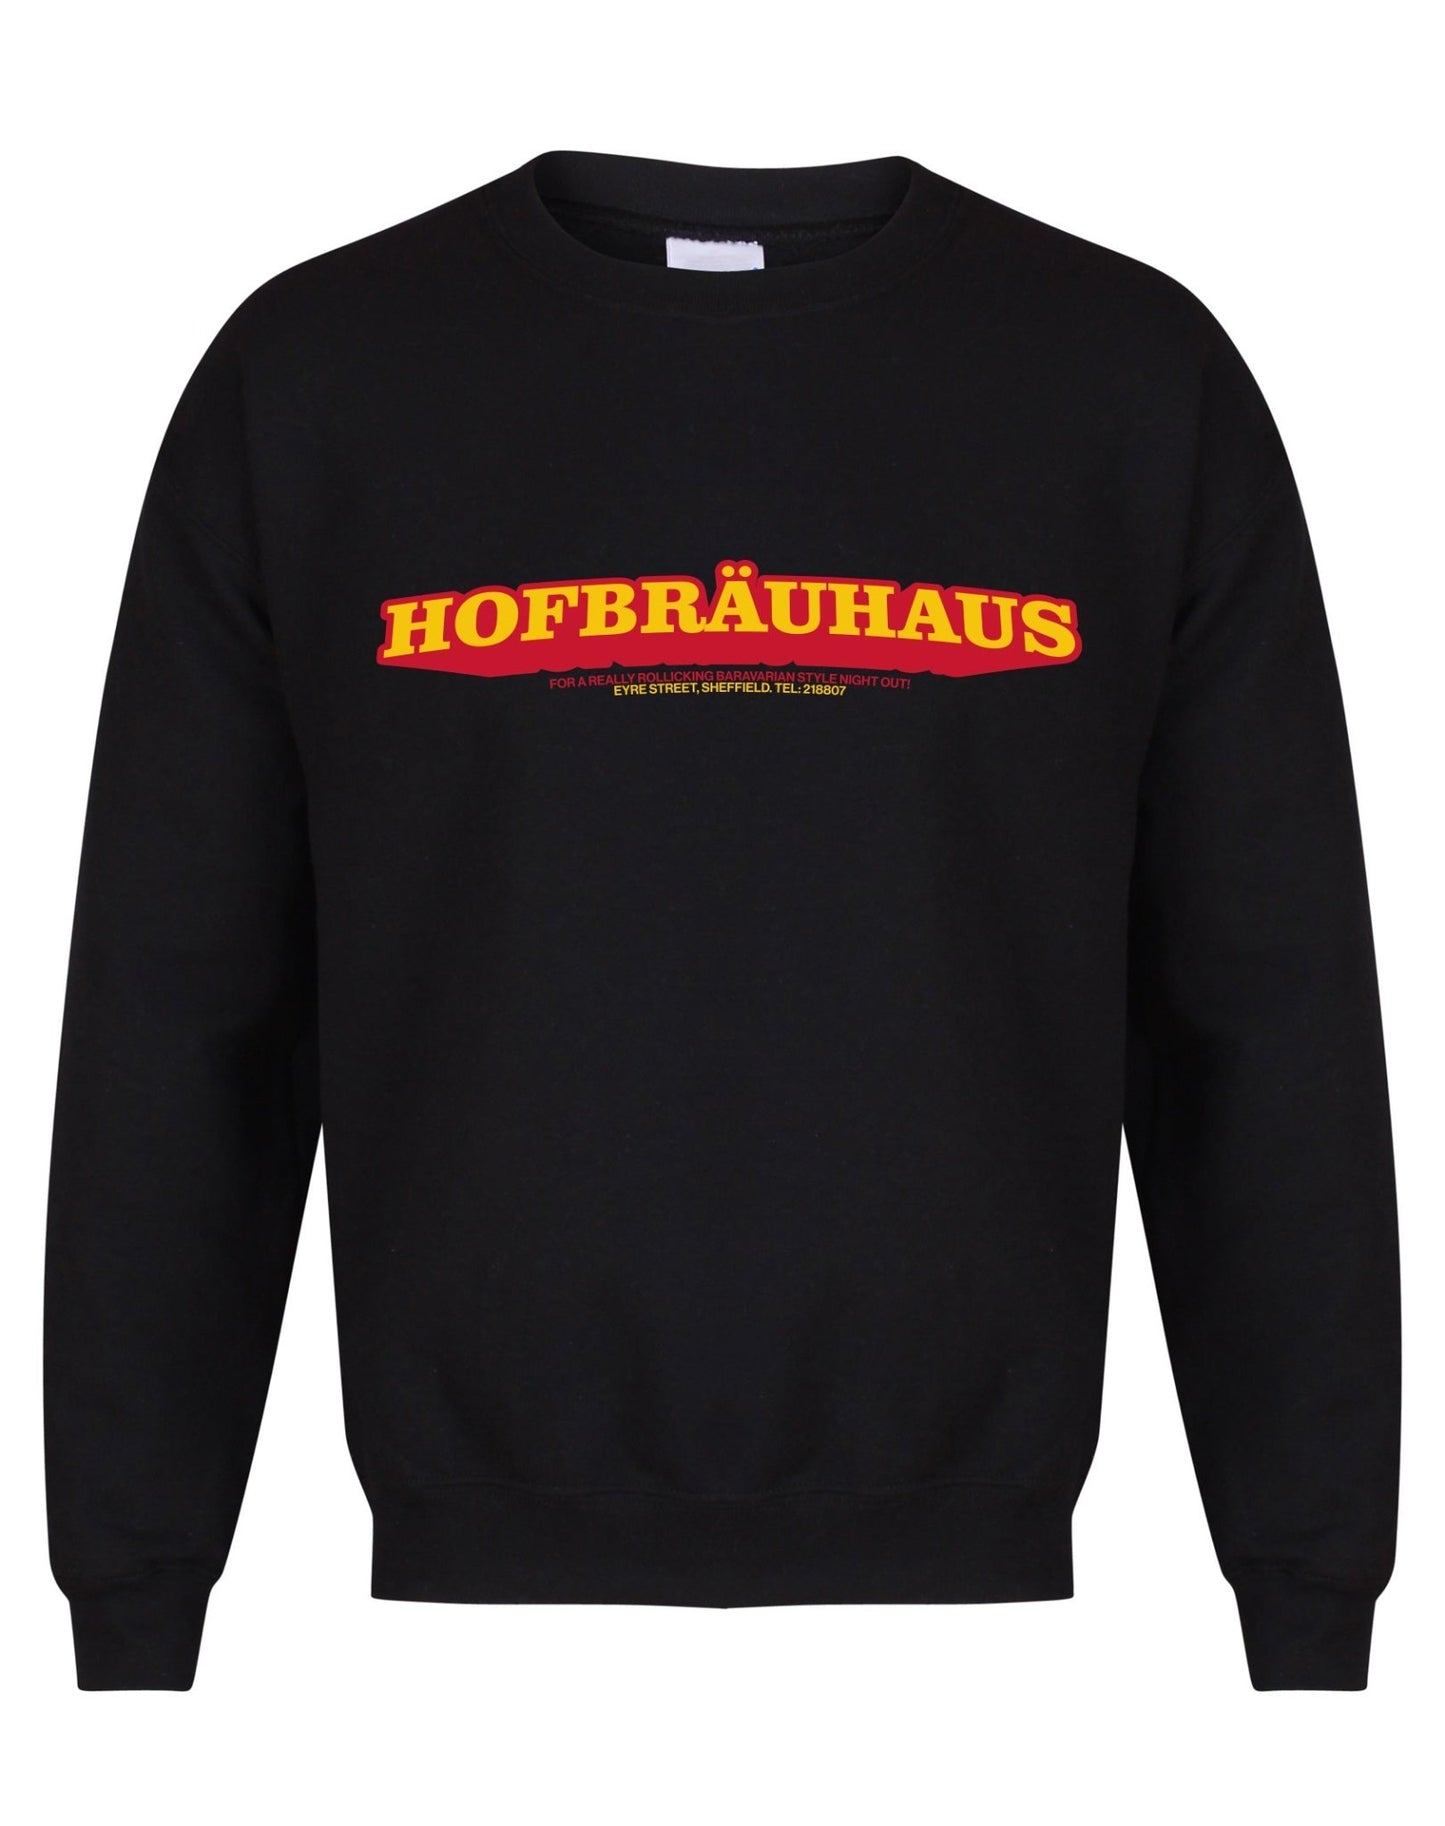 Hofbräuhaus unisex sweatshirt - various colours - Dirty Stop Outs